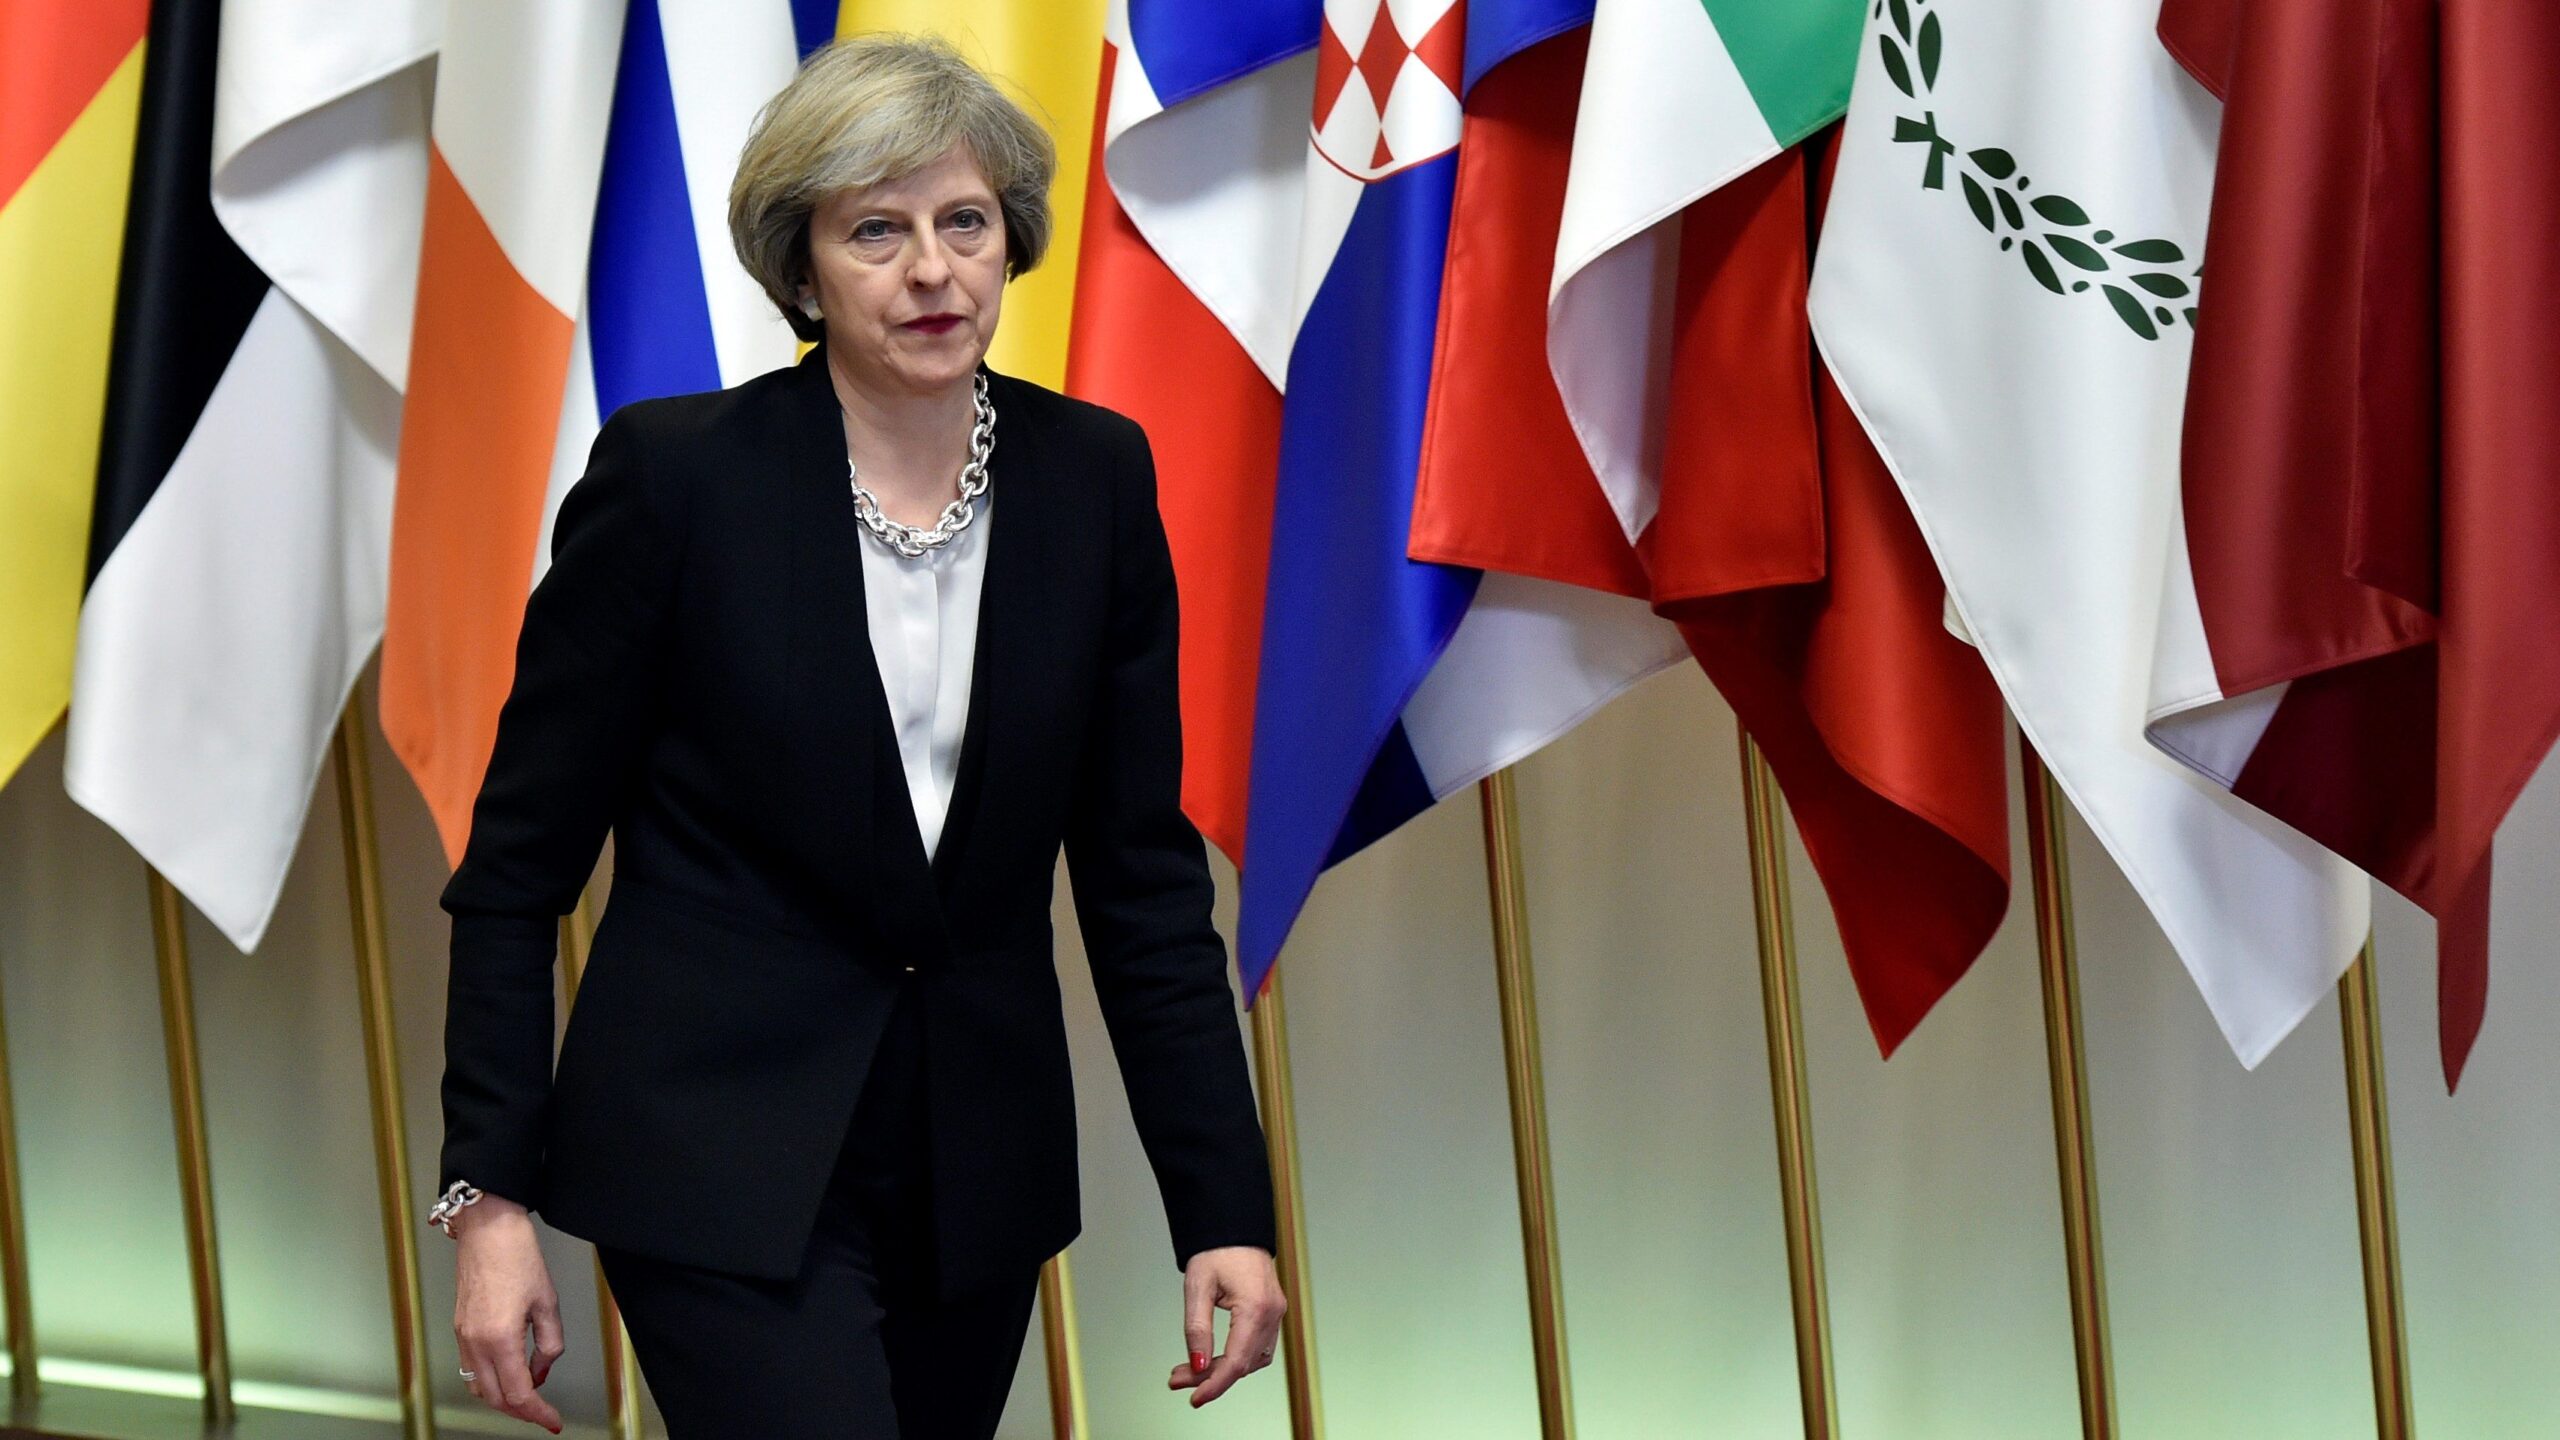 Theresa May Needs to Think Like a Poker Player in Brexit Talks, Says Pro